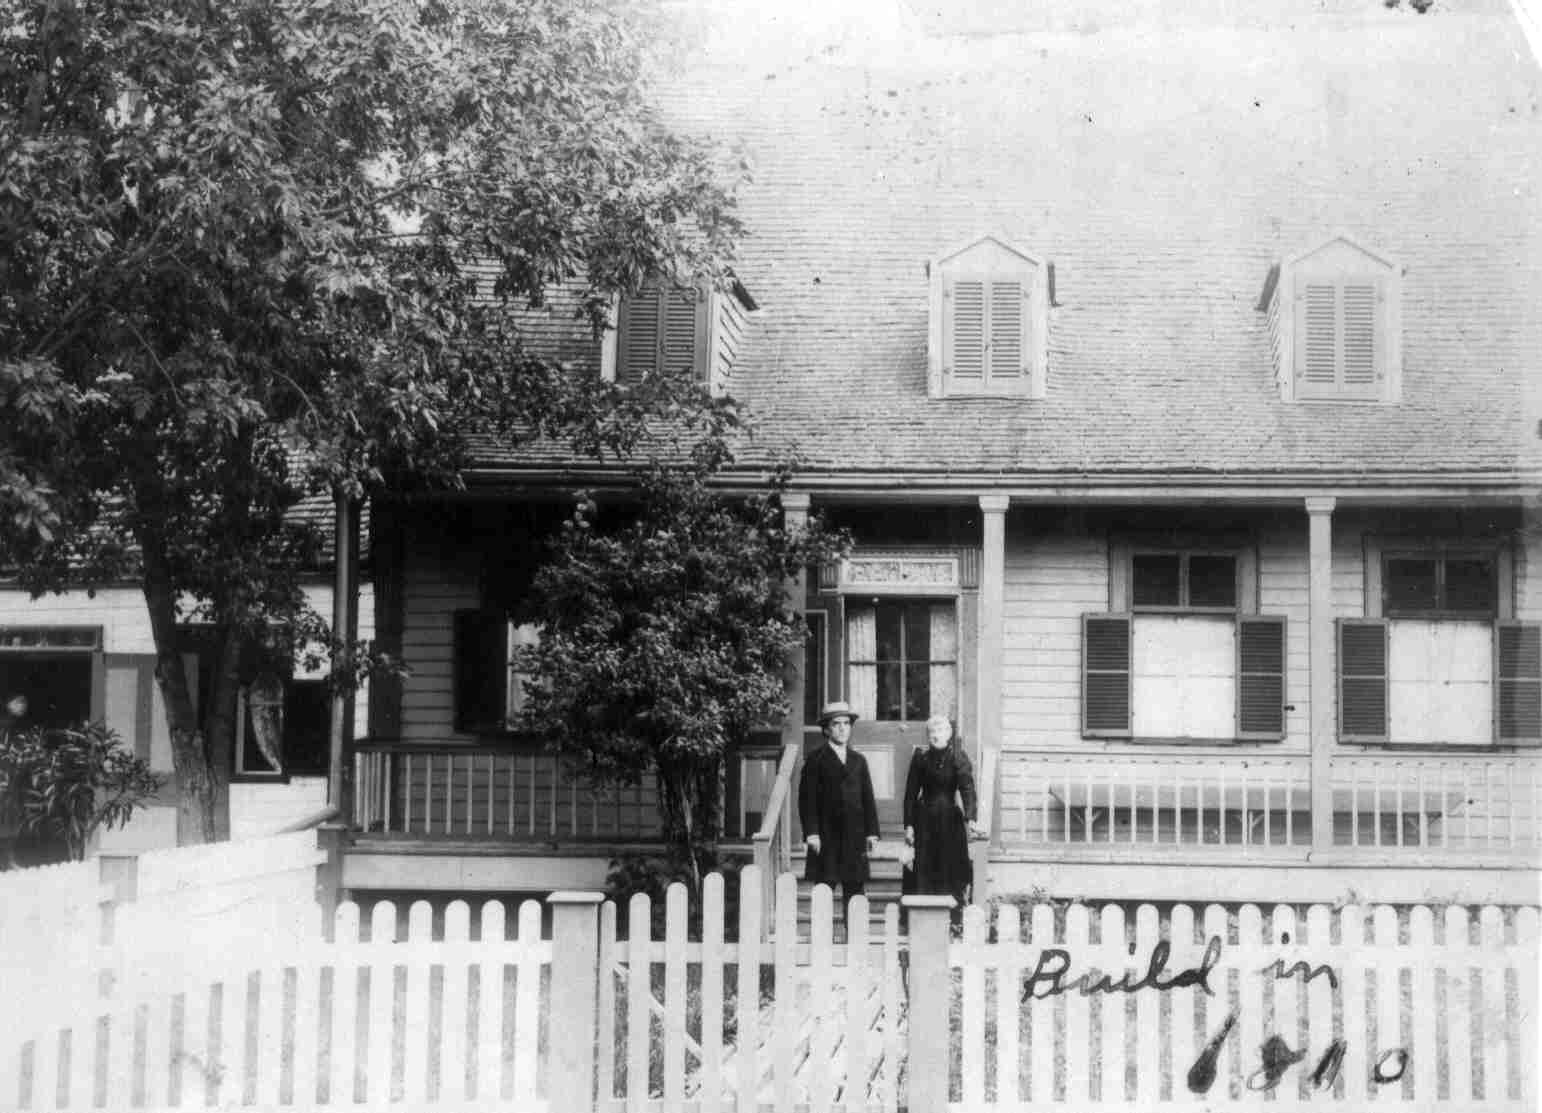 Elvina Poirier's (Demer) home, located in Riguard, Canada, the house was built in 1810.